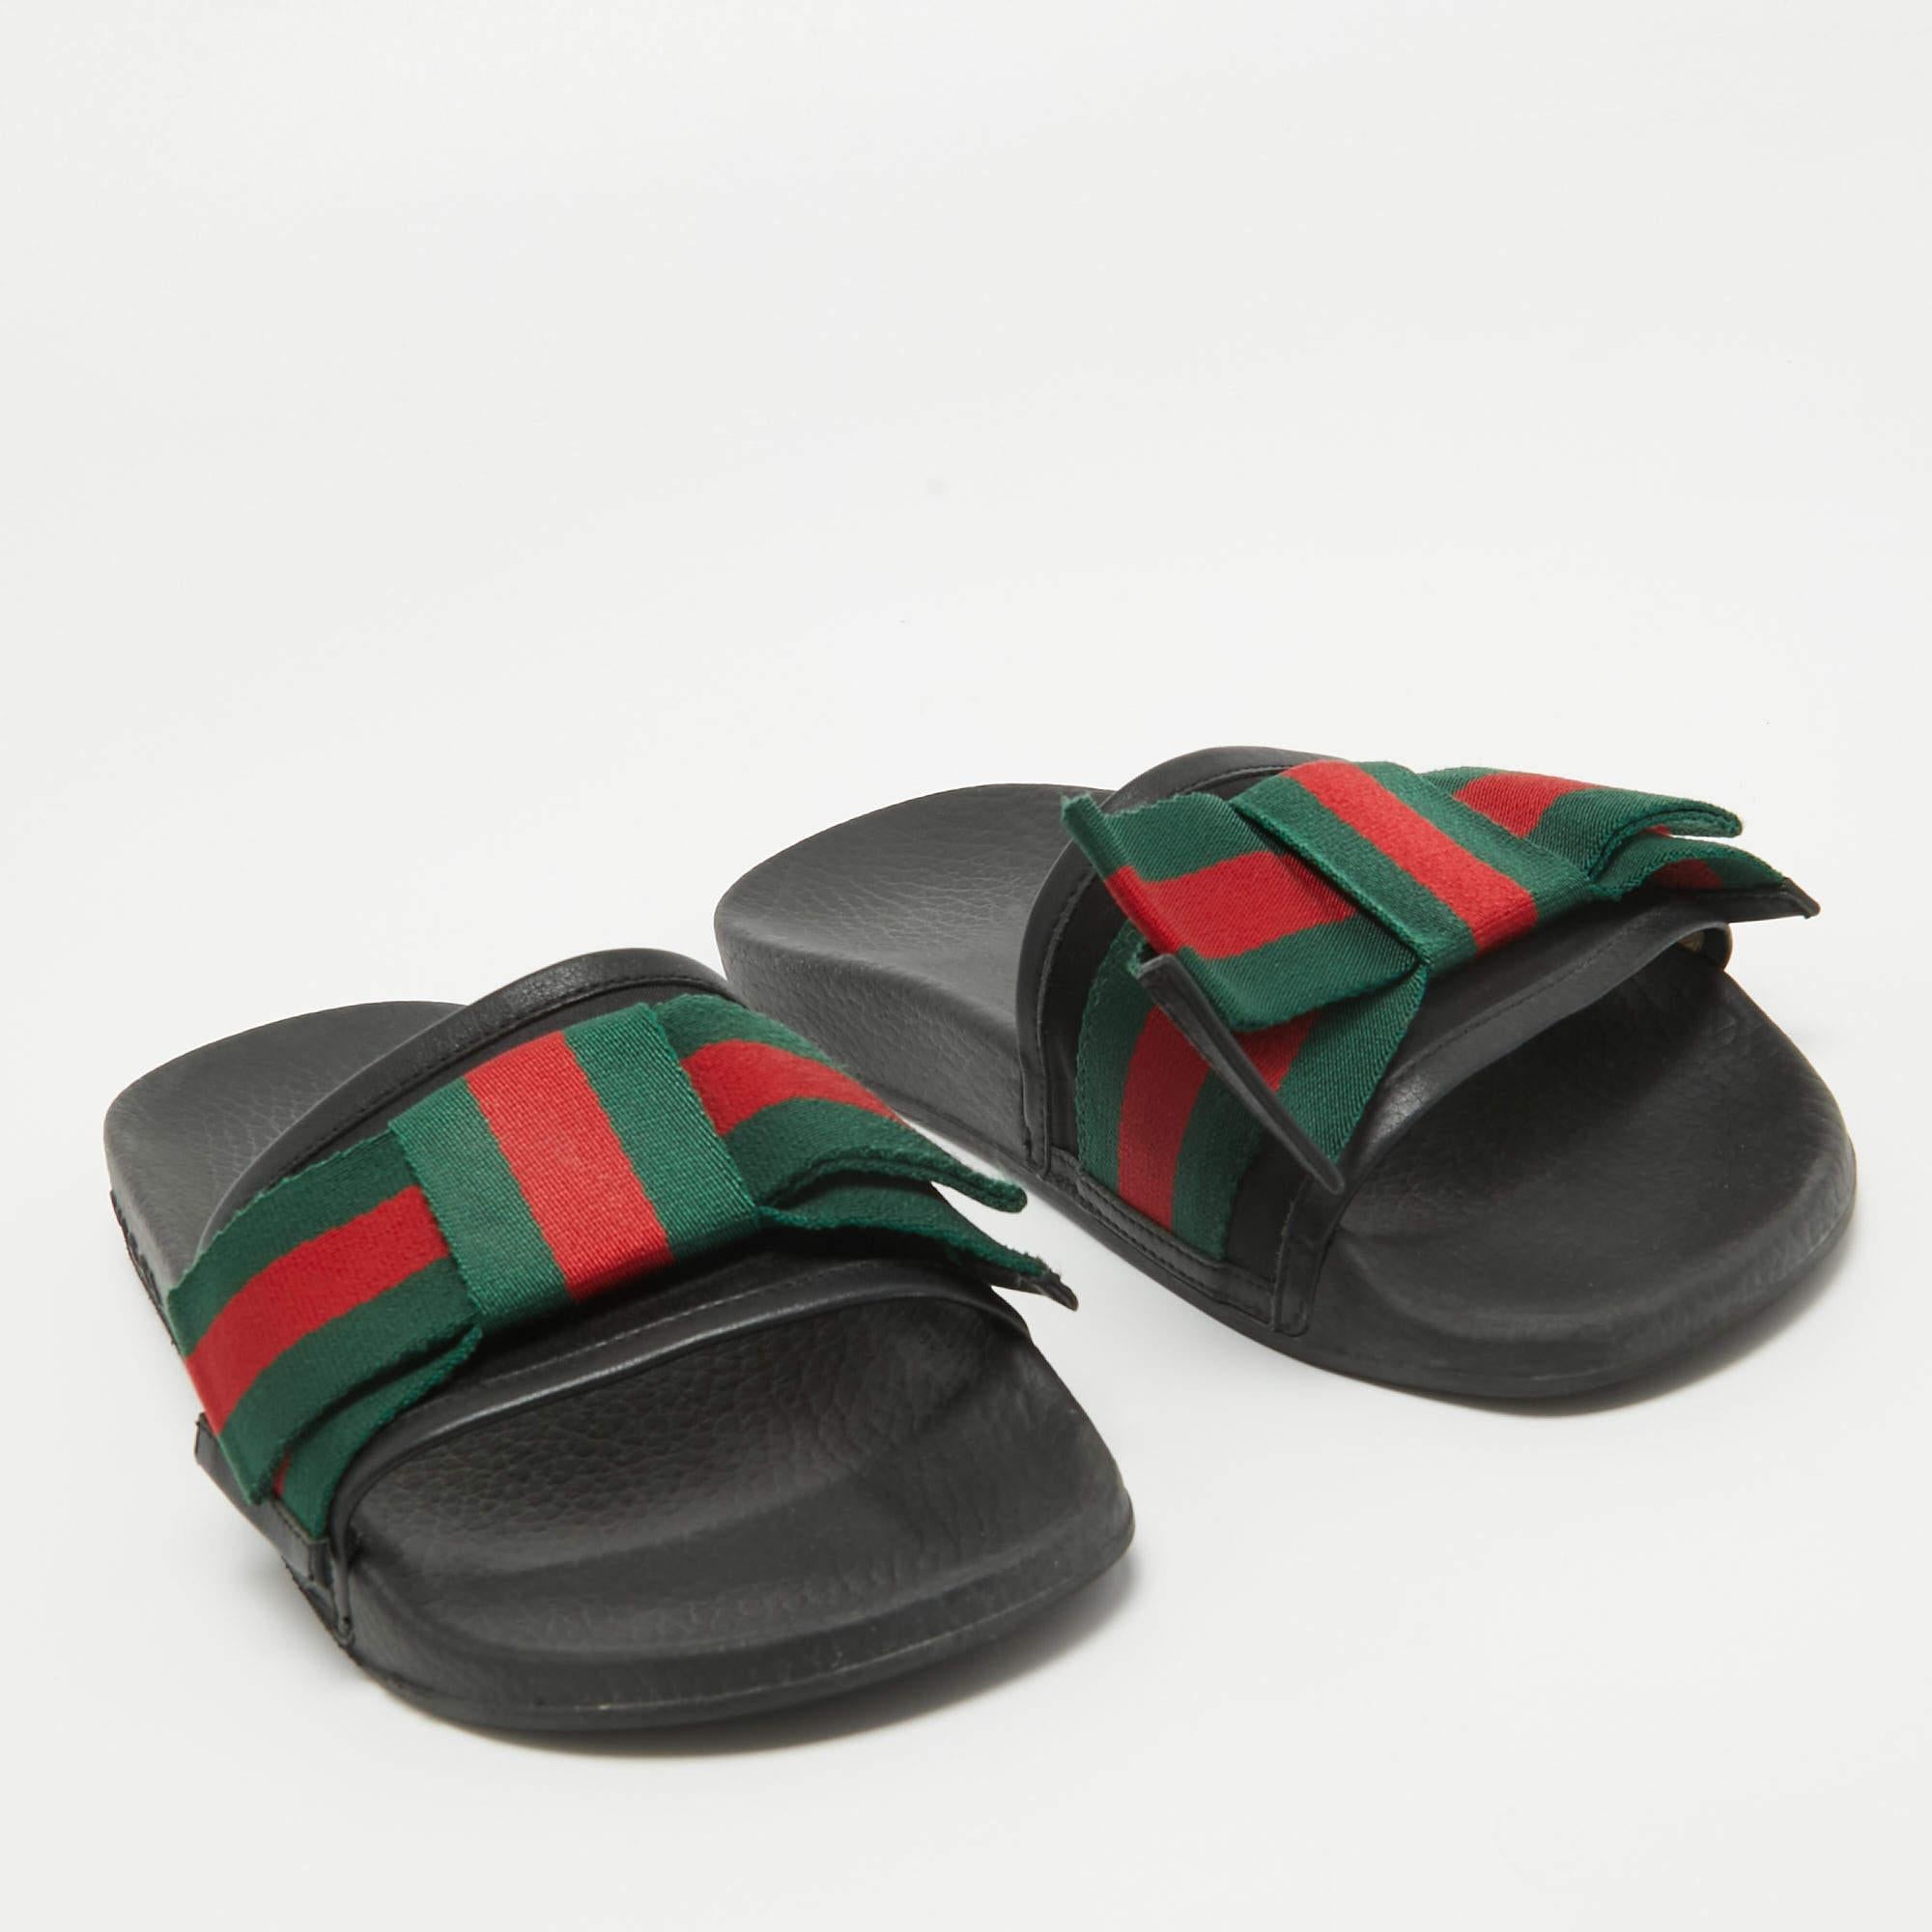 Gucci Tricolor Leather and Fabric Web Bow Pool Slides Size 37 For Sale 3